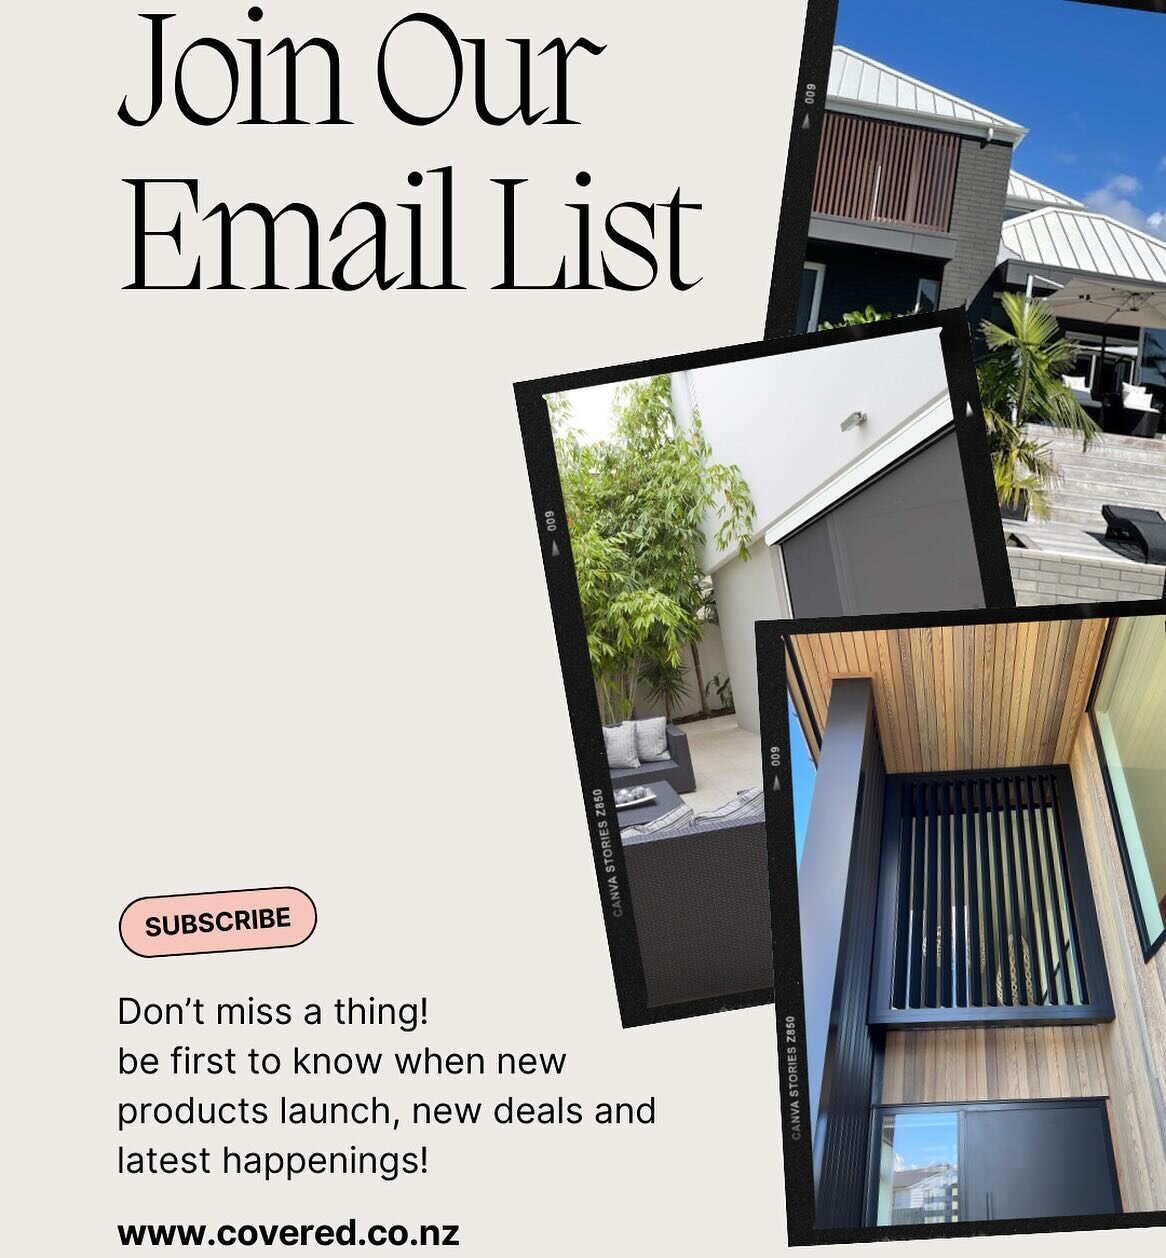 Don&rsquo;t miss a thing&hellip;
Sign up to our mailing list - stay up to date right to your inbox! 

https://www.covered.co.nz

#covered #joinouremaillist #stayuptodate #nzcompany #nzbusiness #beforsttohear #coveredroof #creatingyouroutdoorhaven #lo